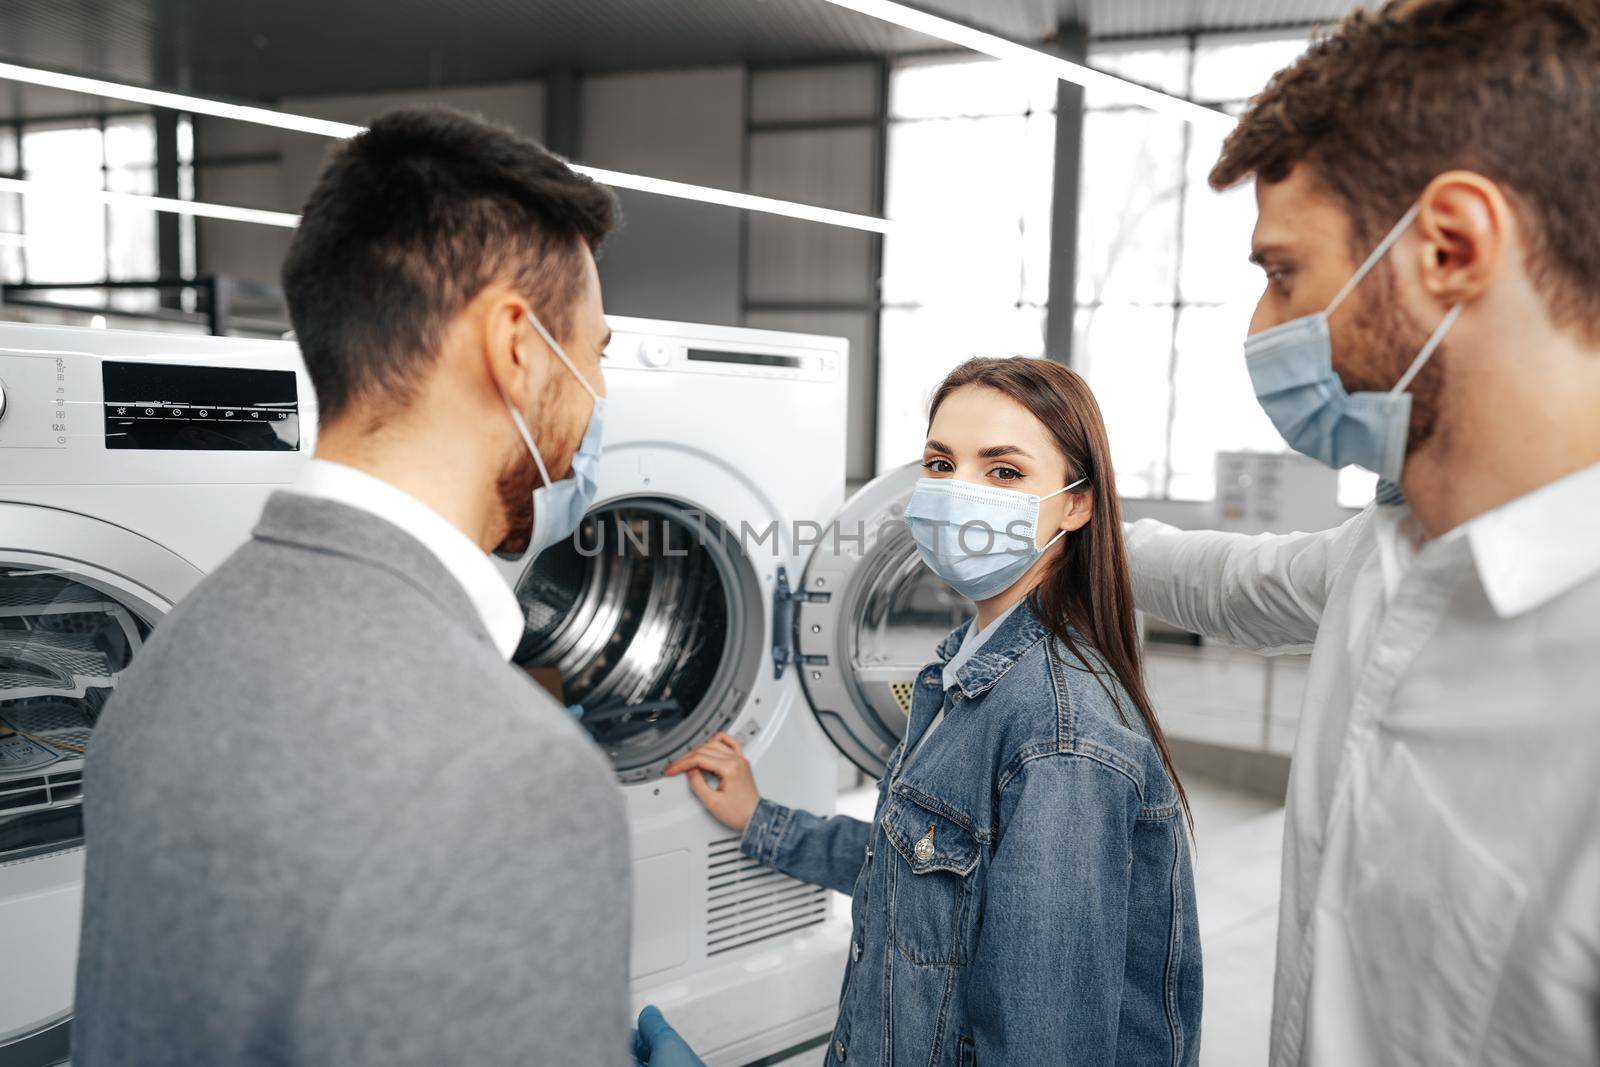 Salesman in hypermarket wearing medical mask demonstrates his clients a new washing machine by Fabrikasimf